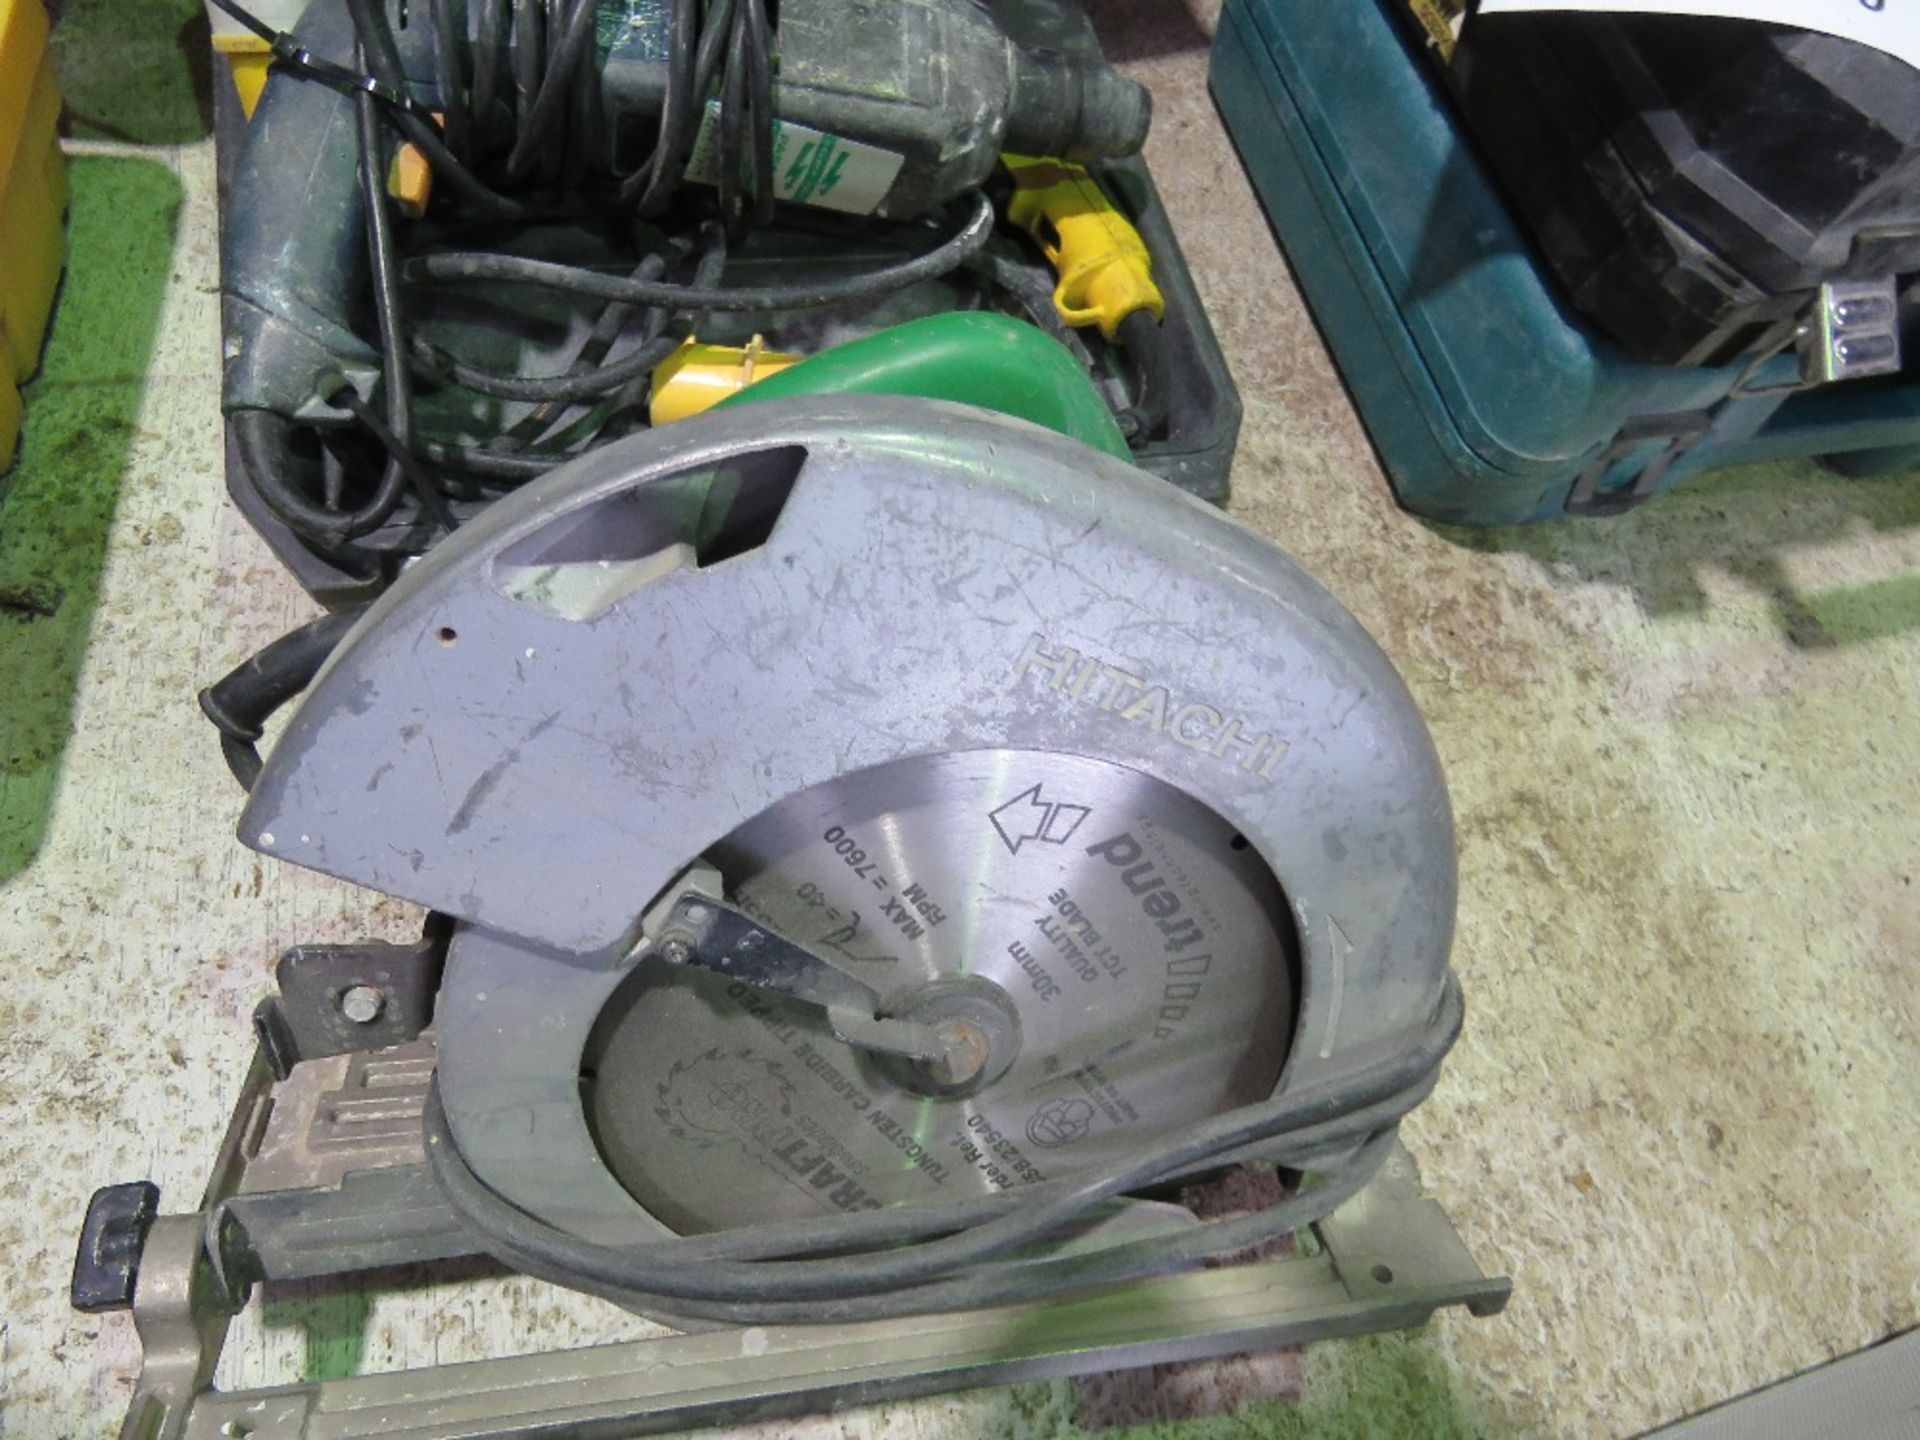 3 X POWER TOOLS: 2 X DRILLS PLUS A CIRCULAR SAW. DIRECT FROM LOCAL COMPANY. - Image 2 of 6